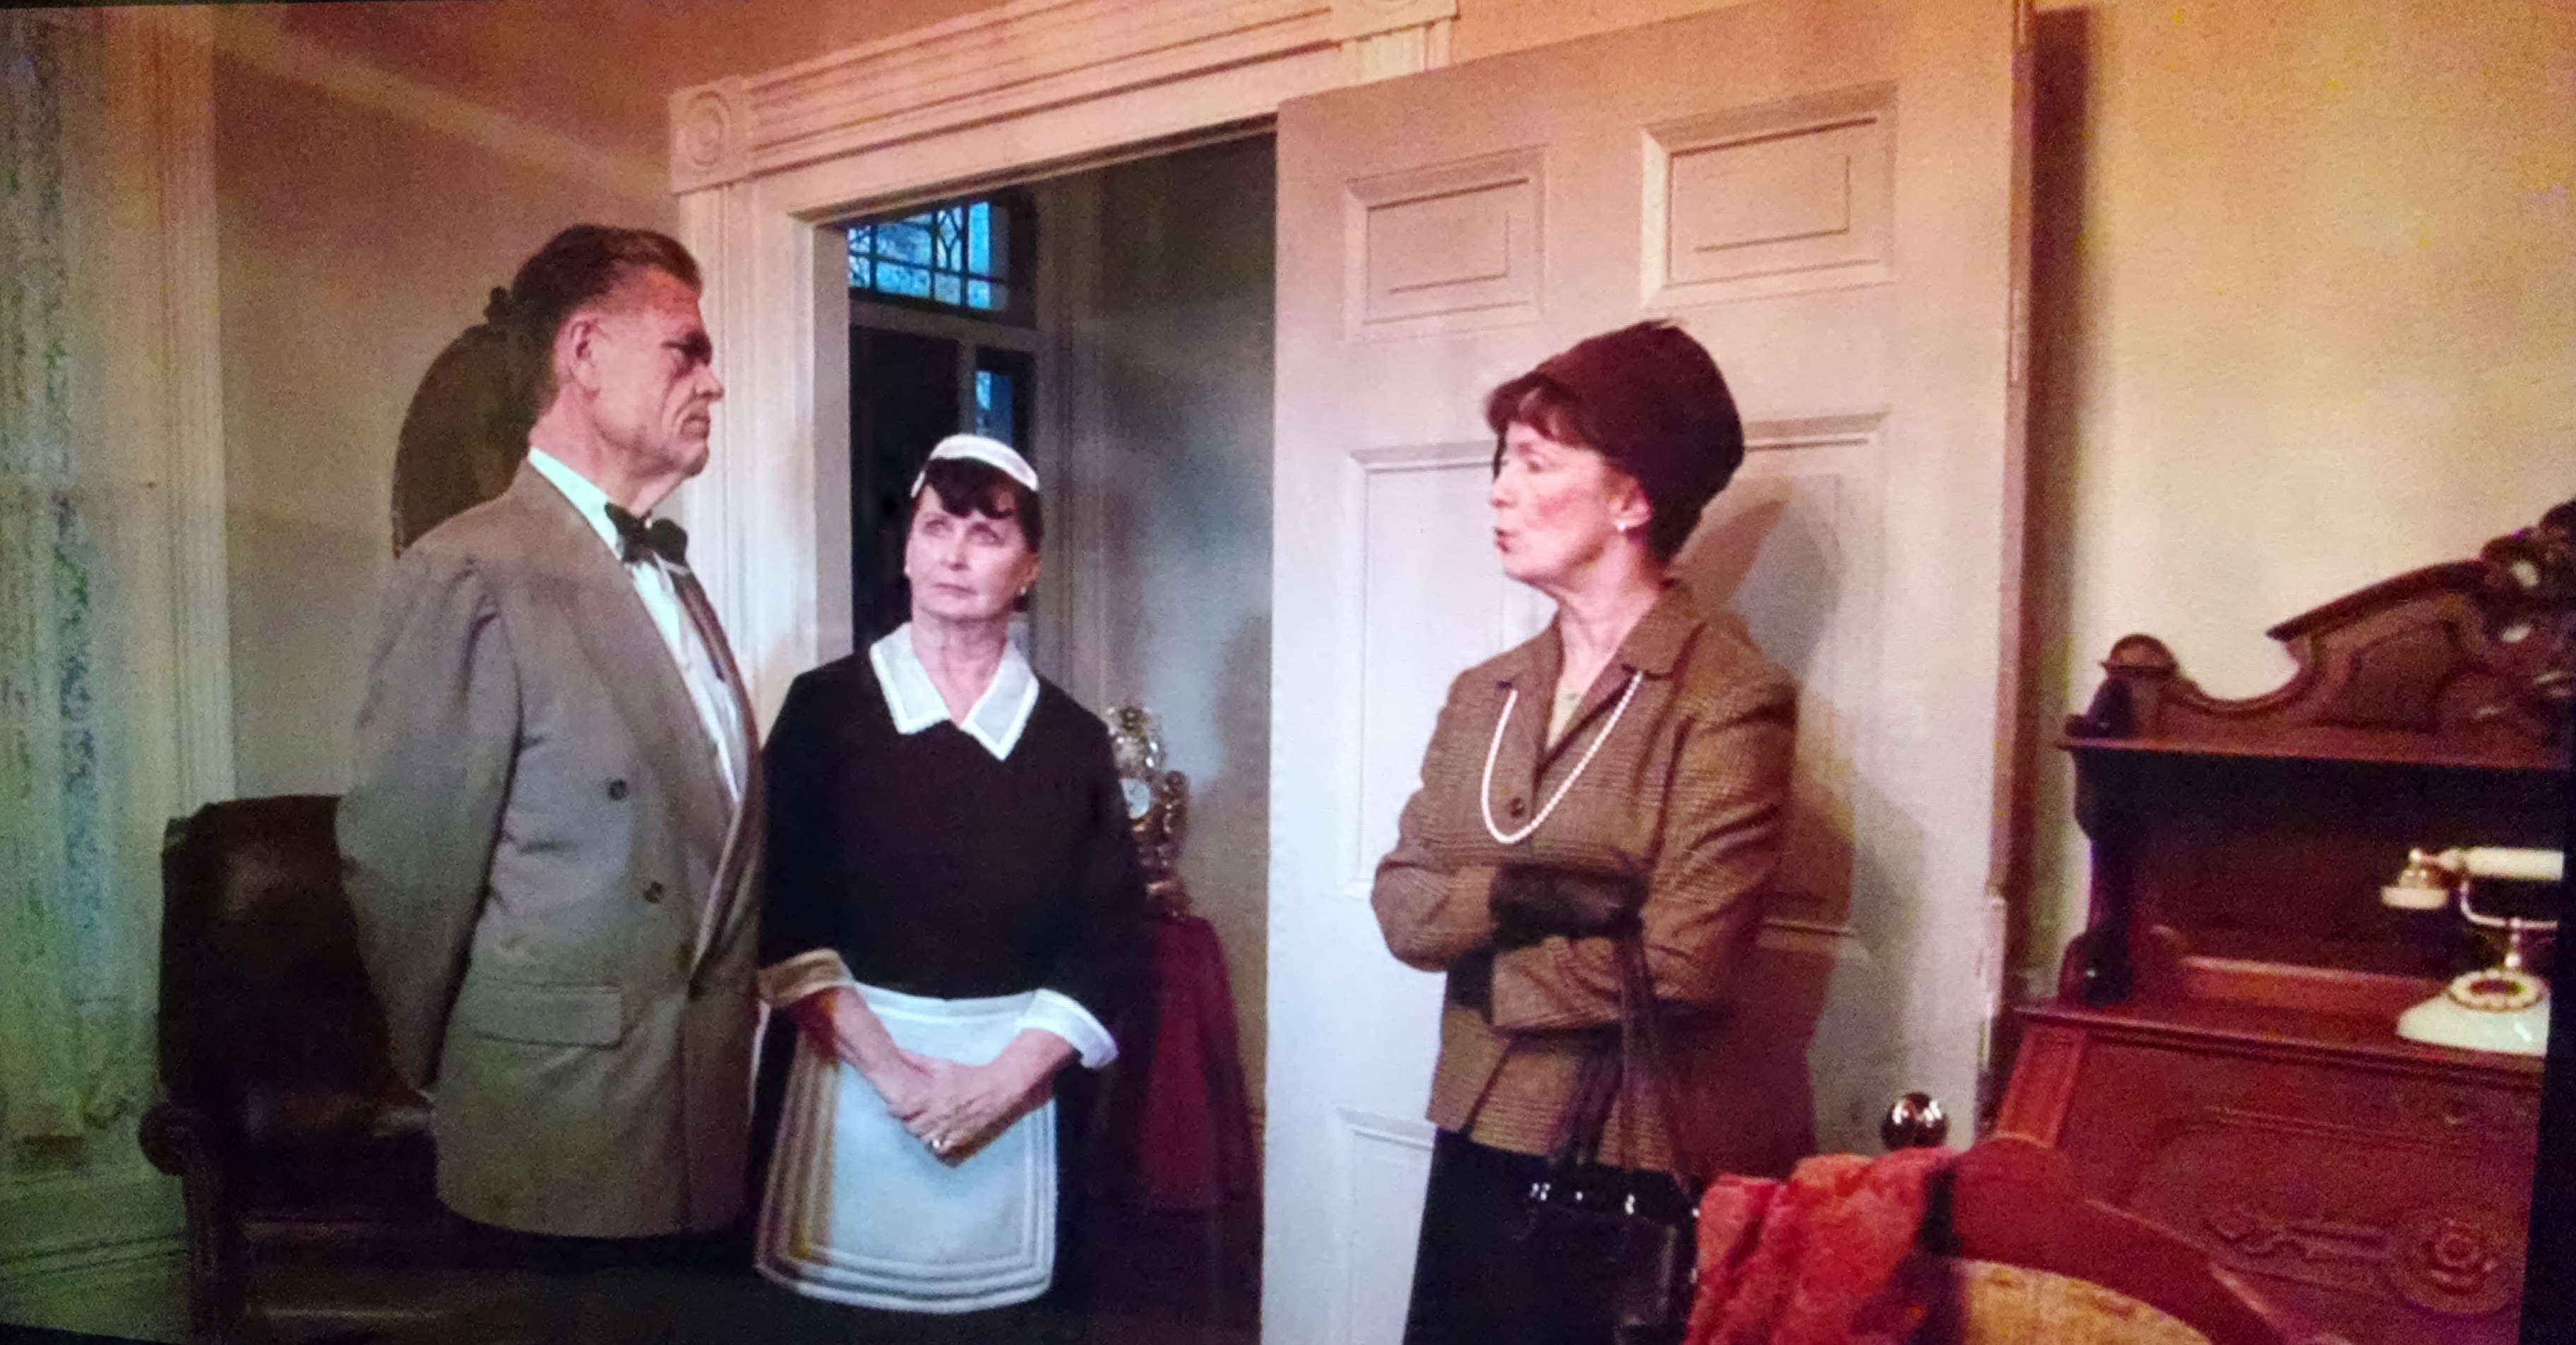 Actress, Brenda Moss-Clifton (middle as Mrs. Davis in Holey Matrimony 2014) Bryan Lassiter on the left, and Joan Reilly on right